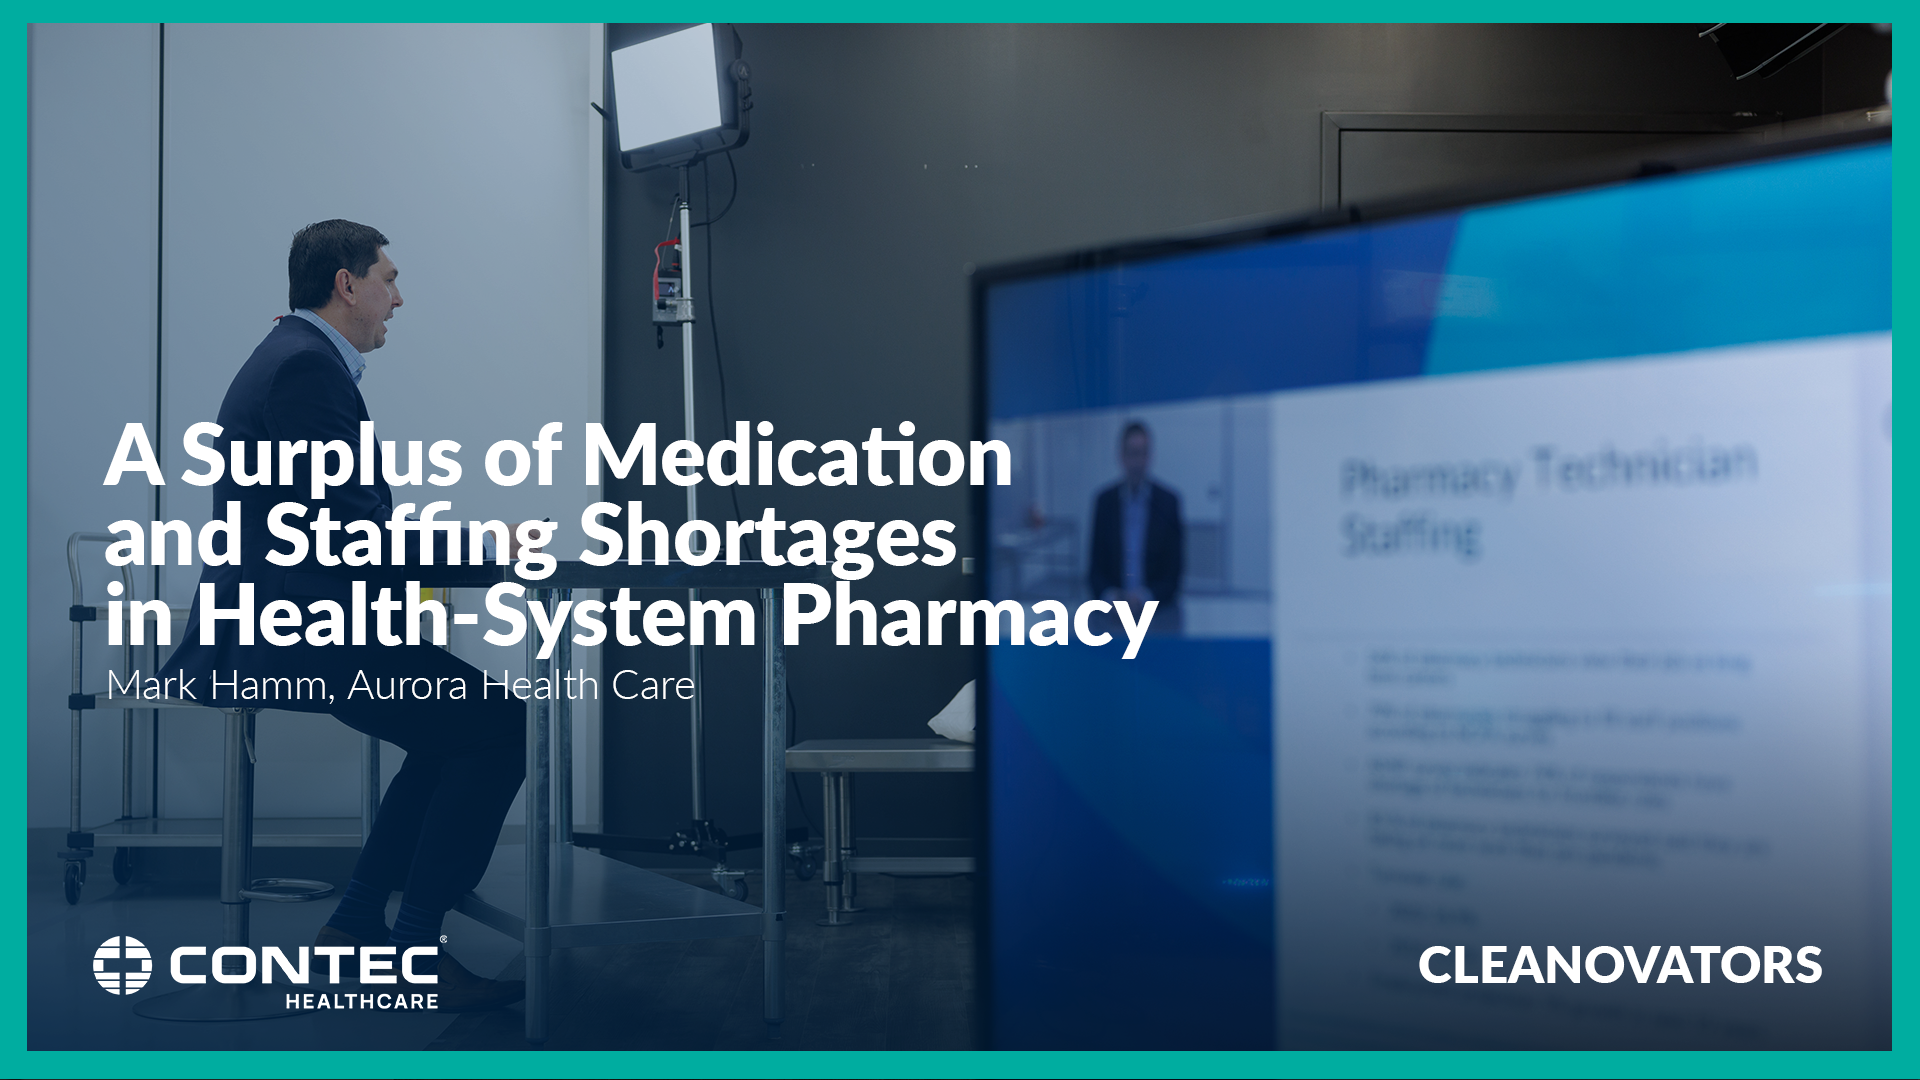 Image of CLEANOVATORS 2023: A Surplus of Medication and Staffing Shortages in Health-System Pharmacy